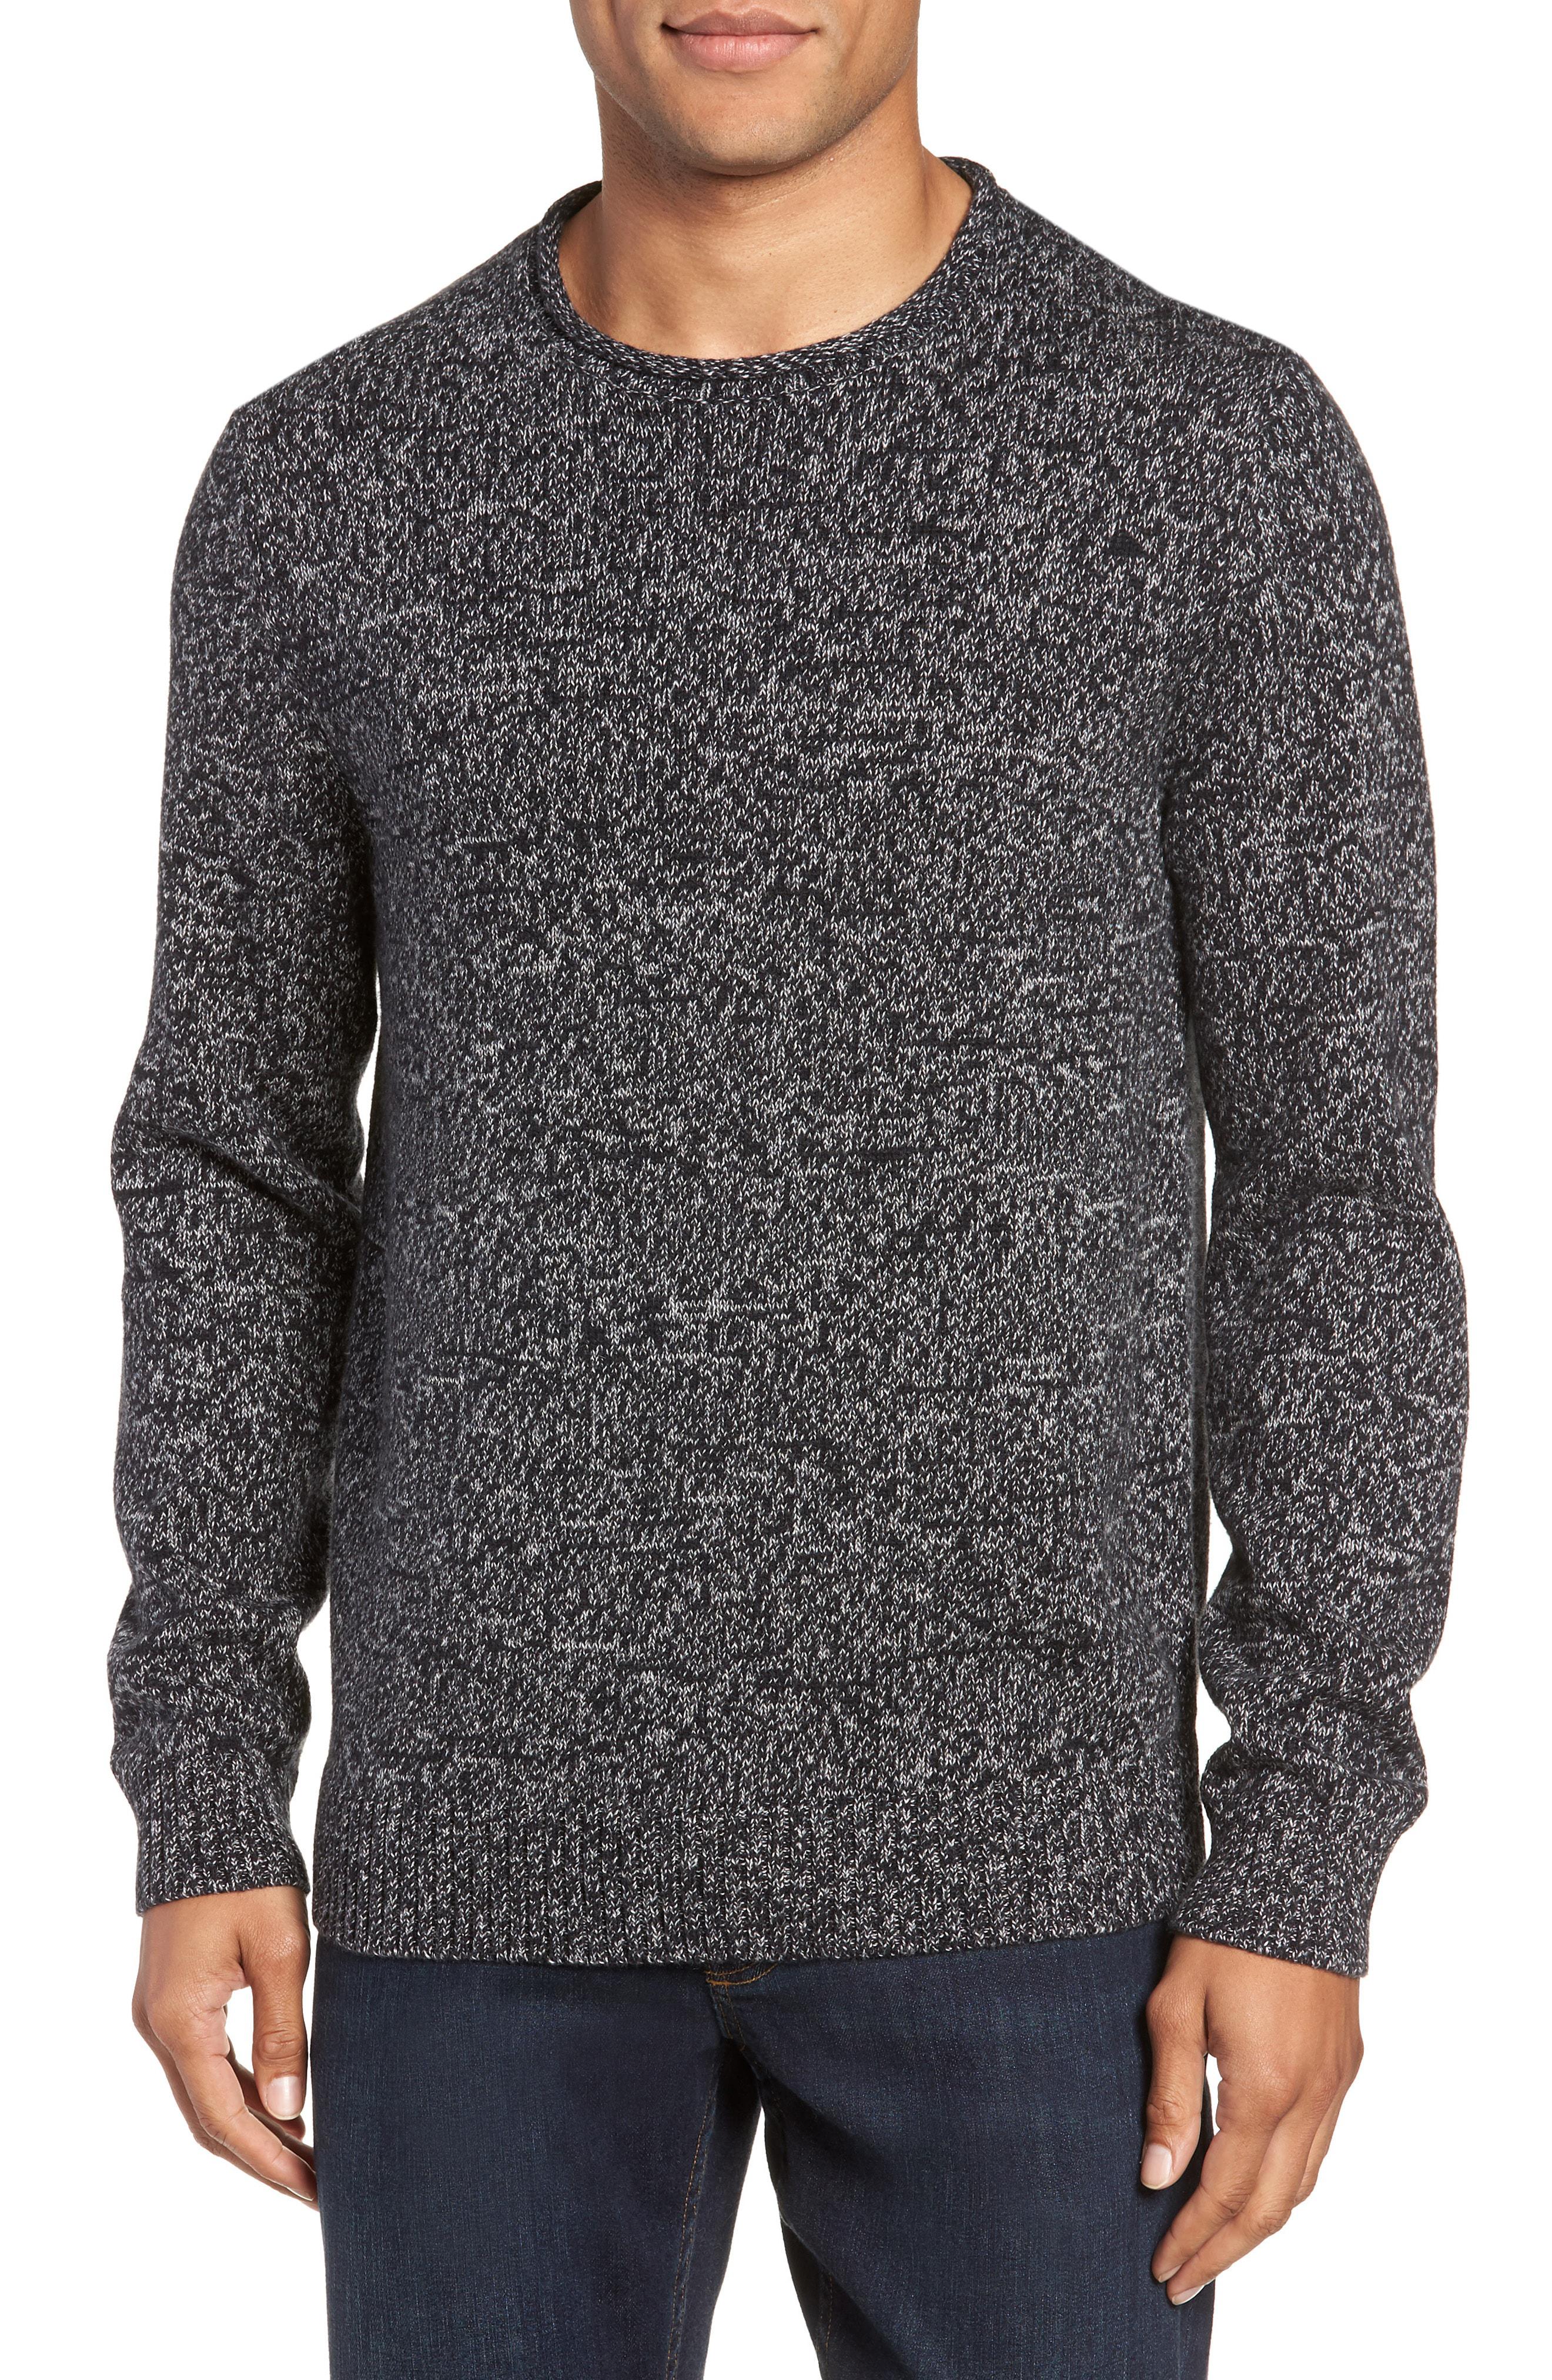 Lyst - Nordstrom Marled Cotton & Cashmere Roll Neck Sweater in Gray for Men